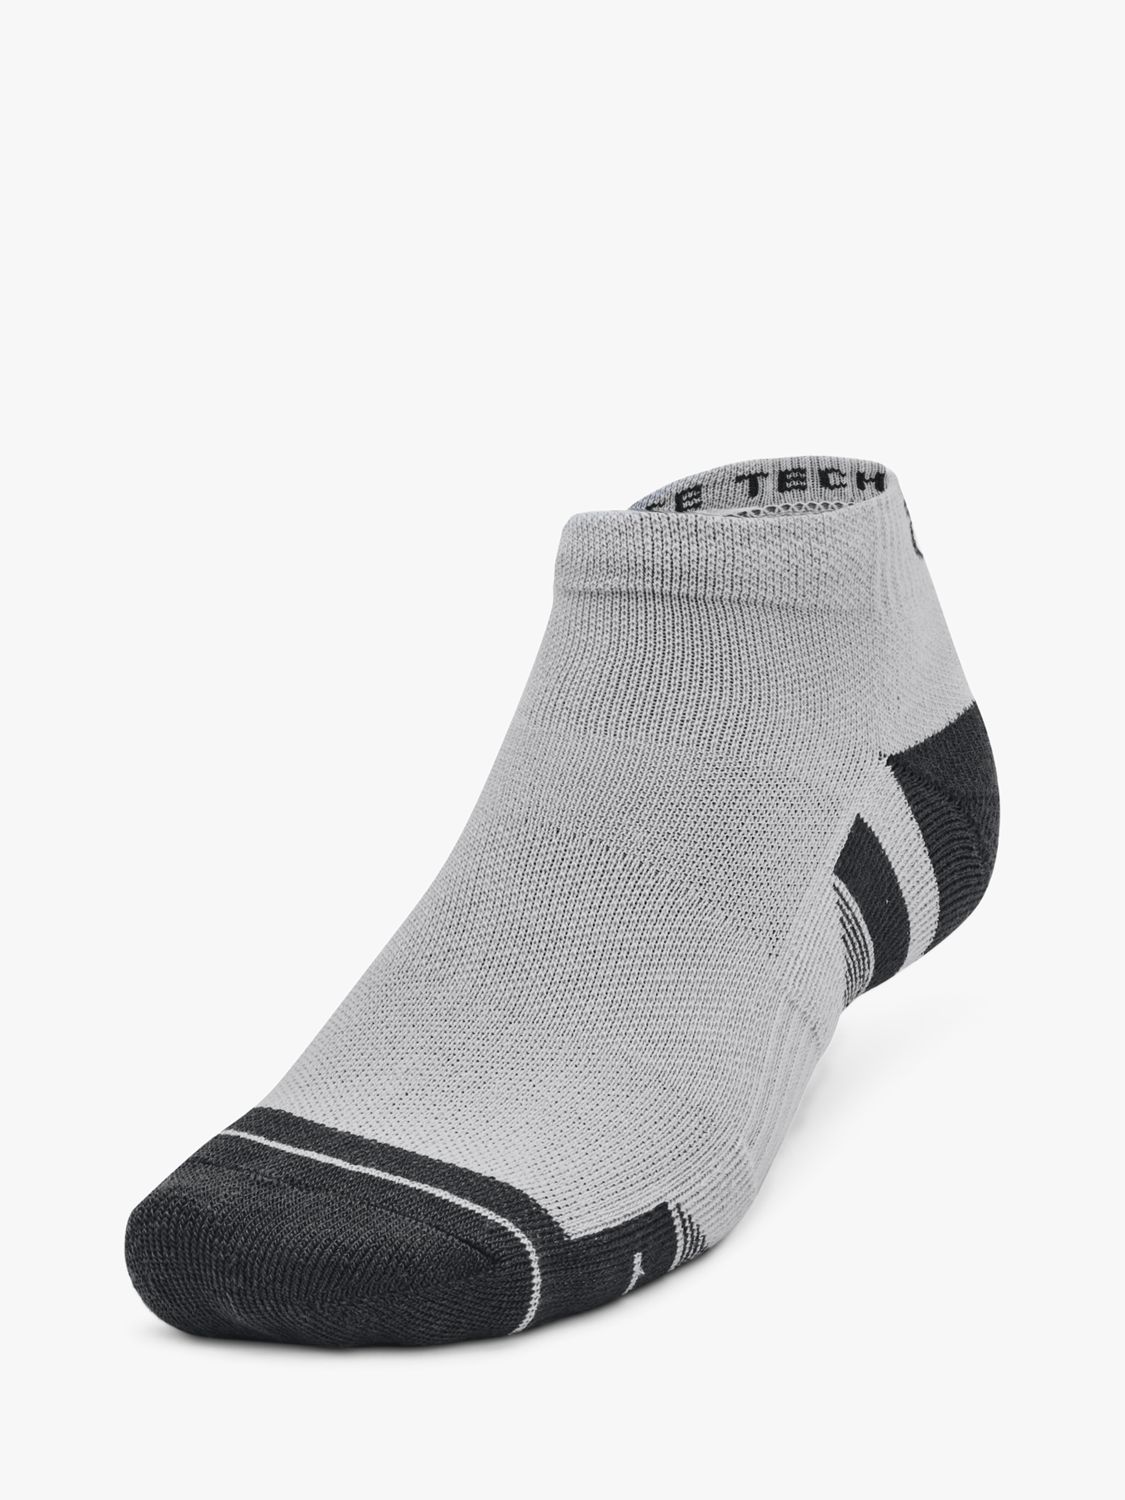 Buy Under Armour Performance Tech Low Cut Socks, Pack of 3, Mod Gray/White/Jet Gray Online at johnlewis.com